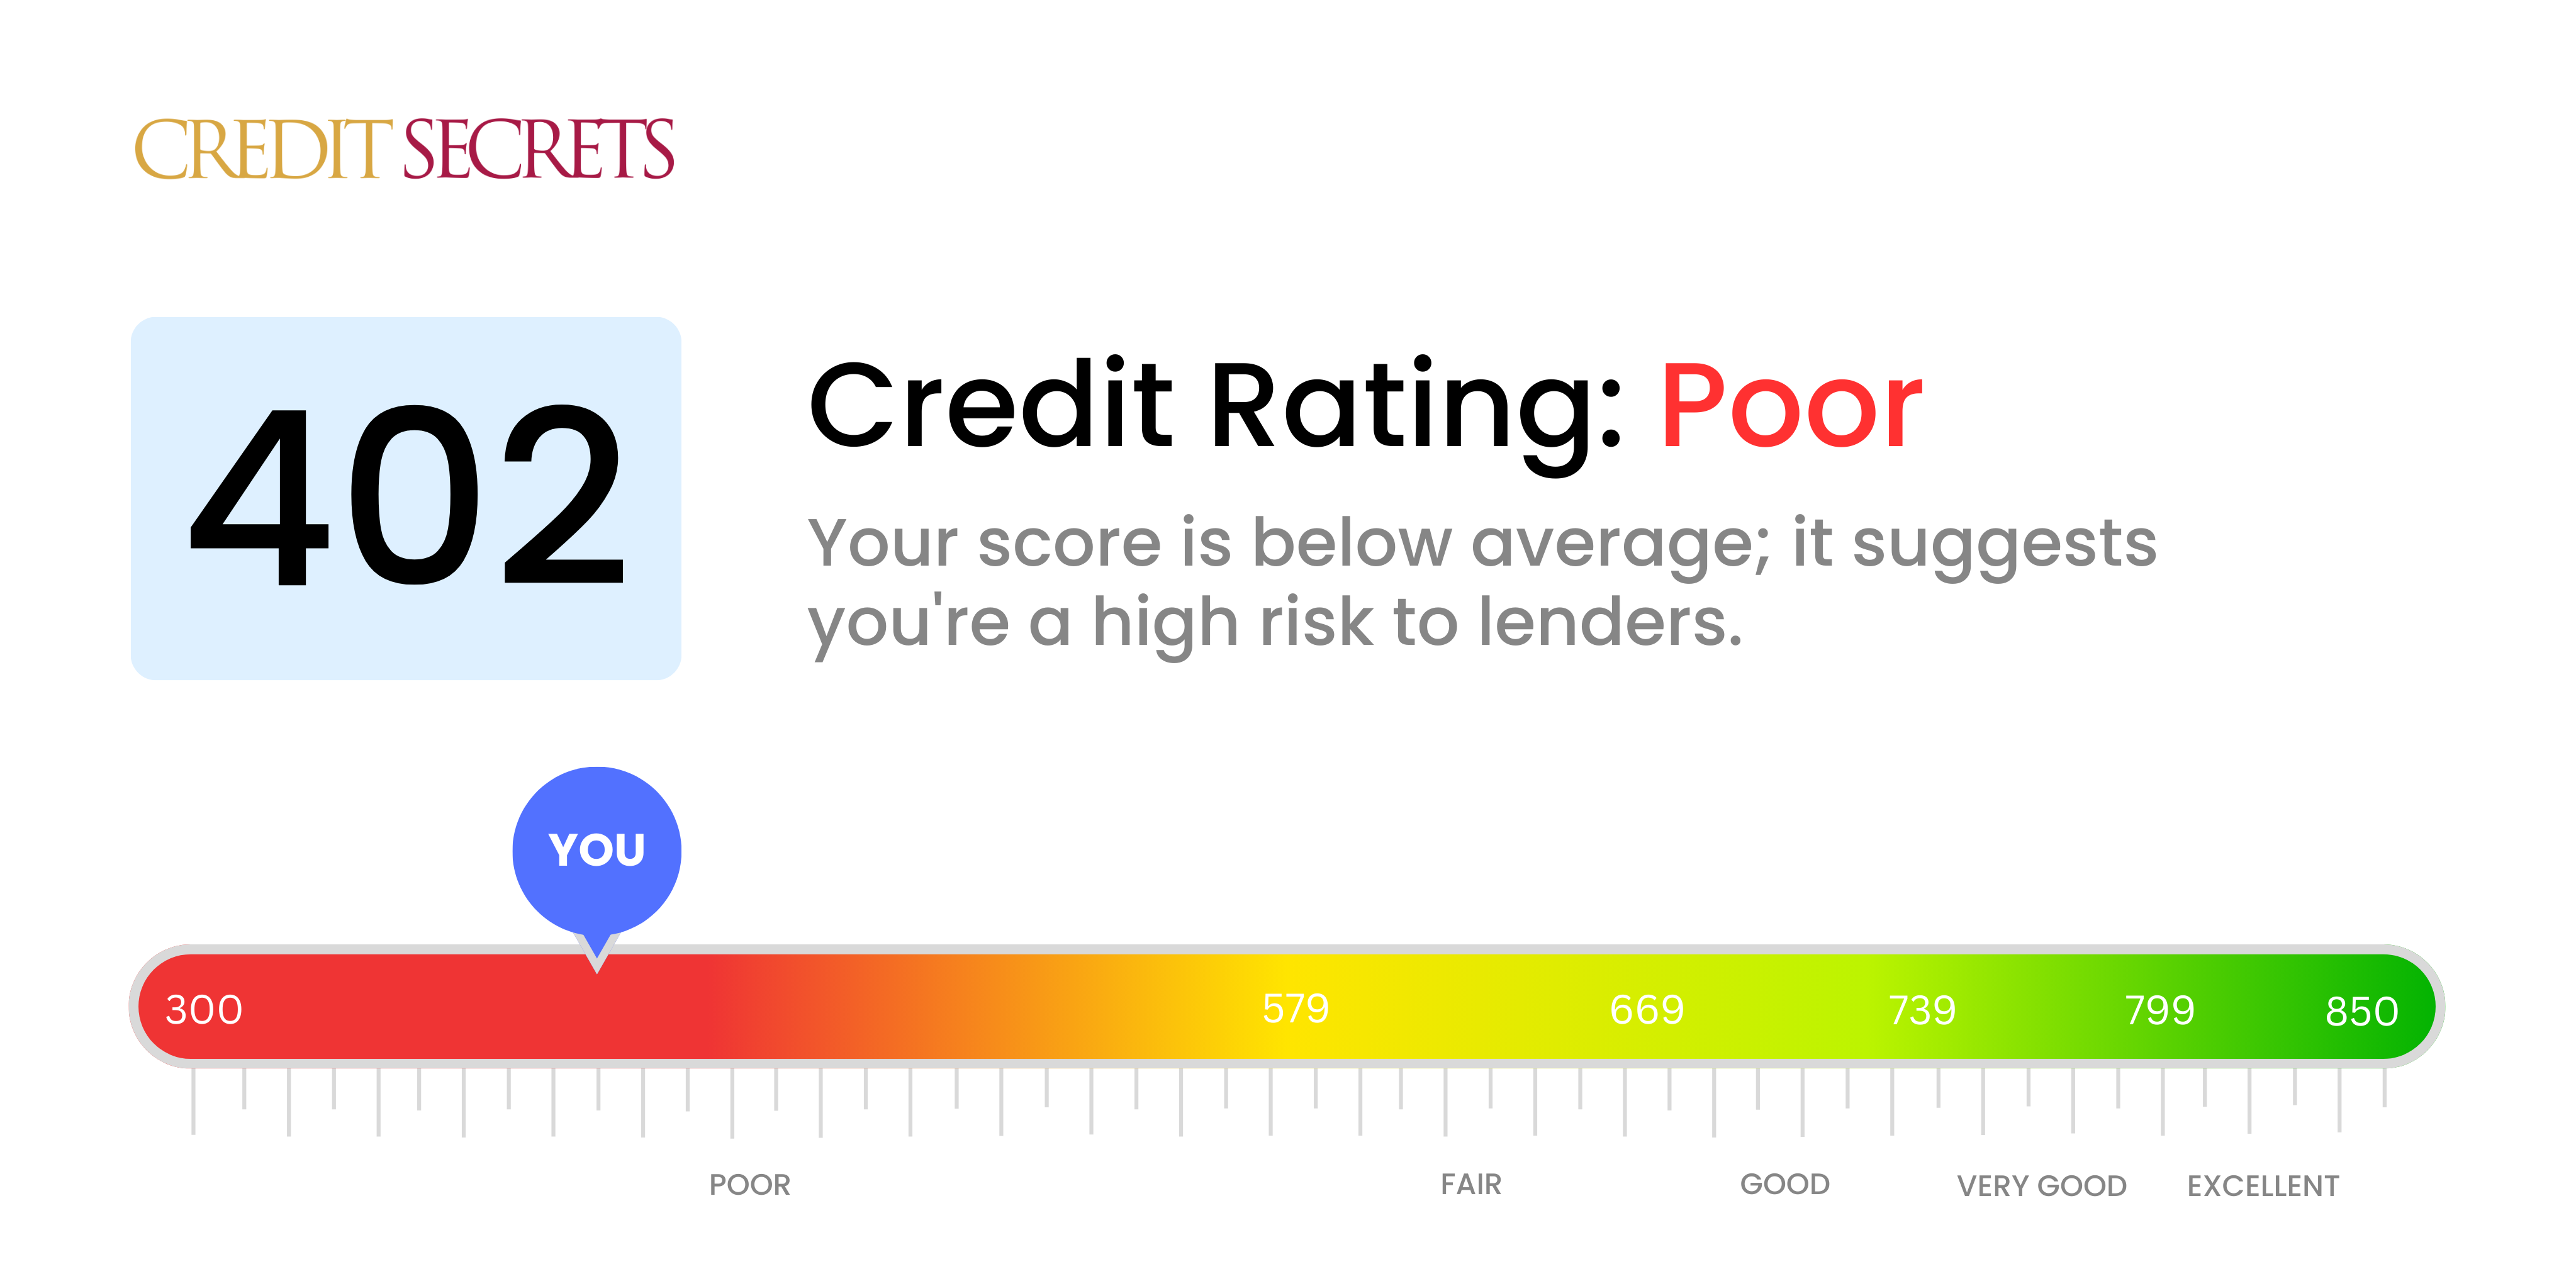 Is 402 a good credit score?